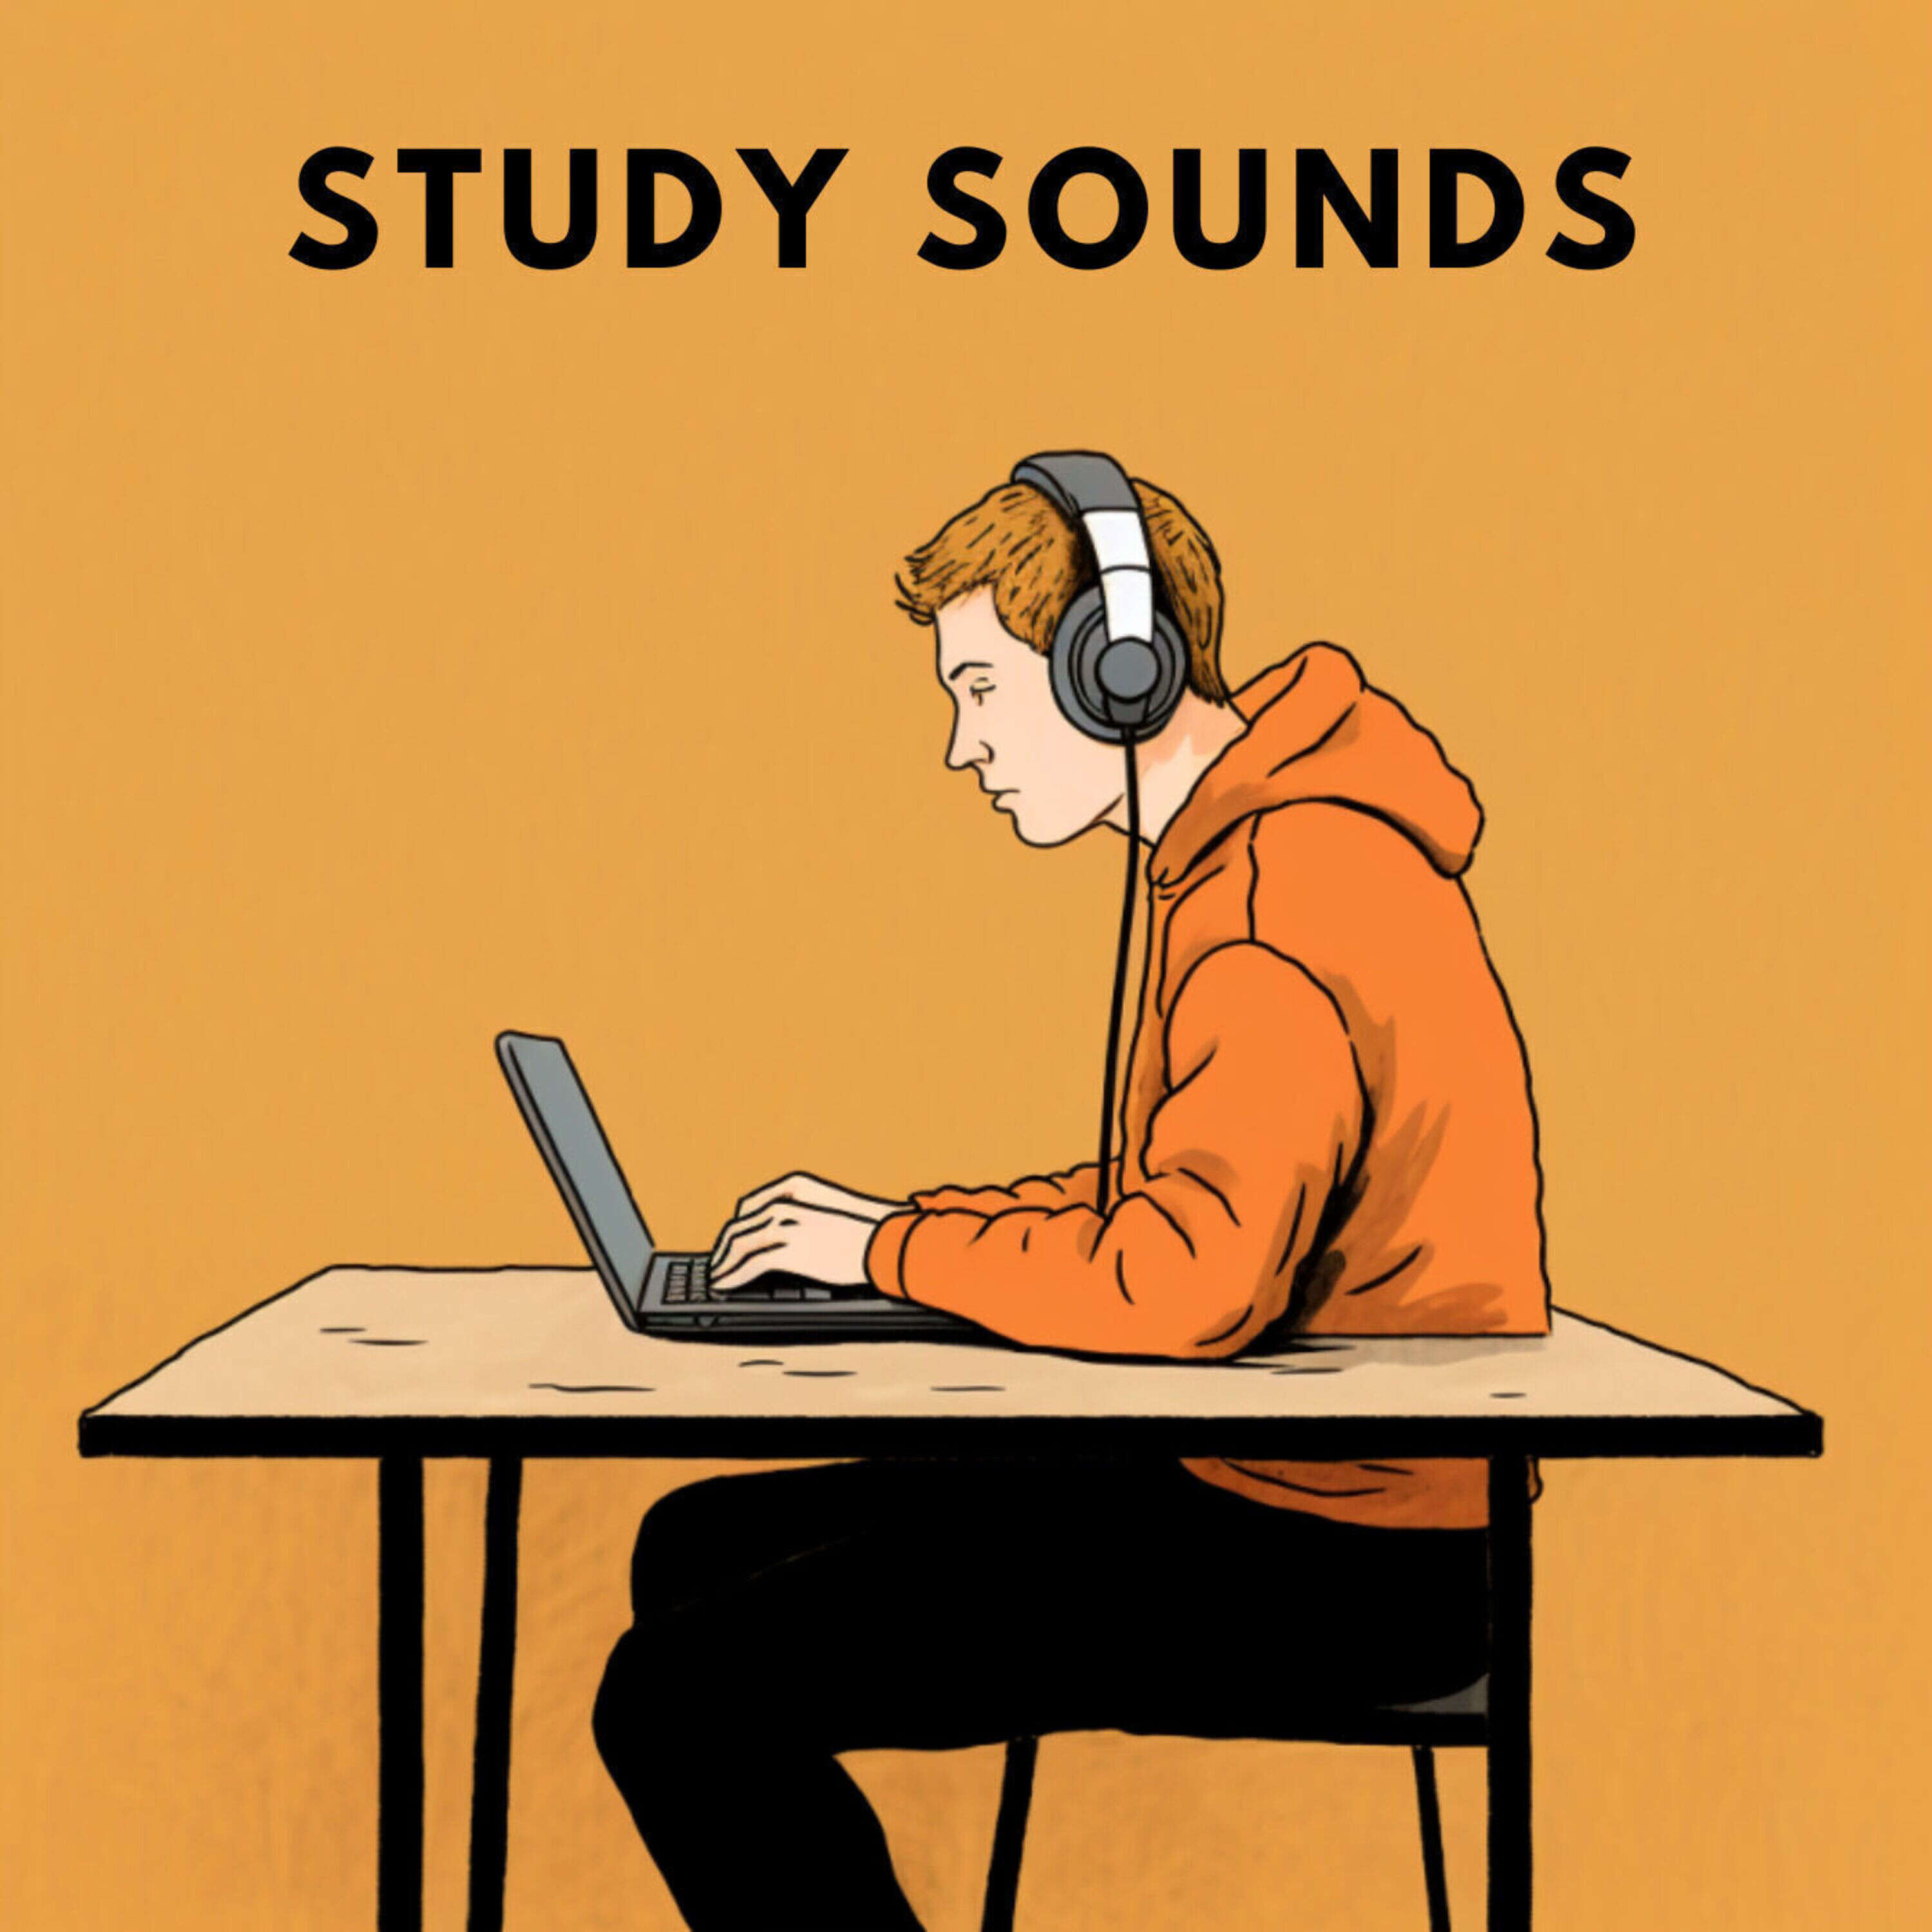 5 am quiet sounds for reading, writing and studying